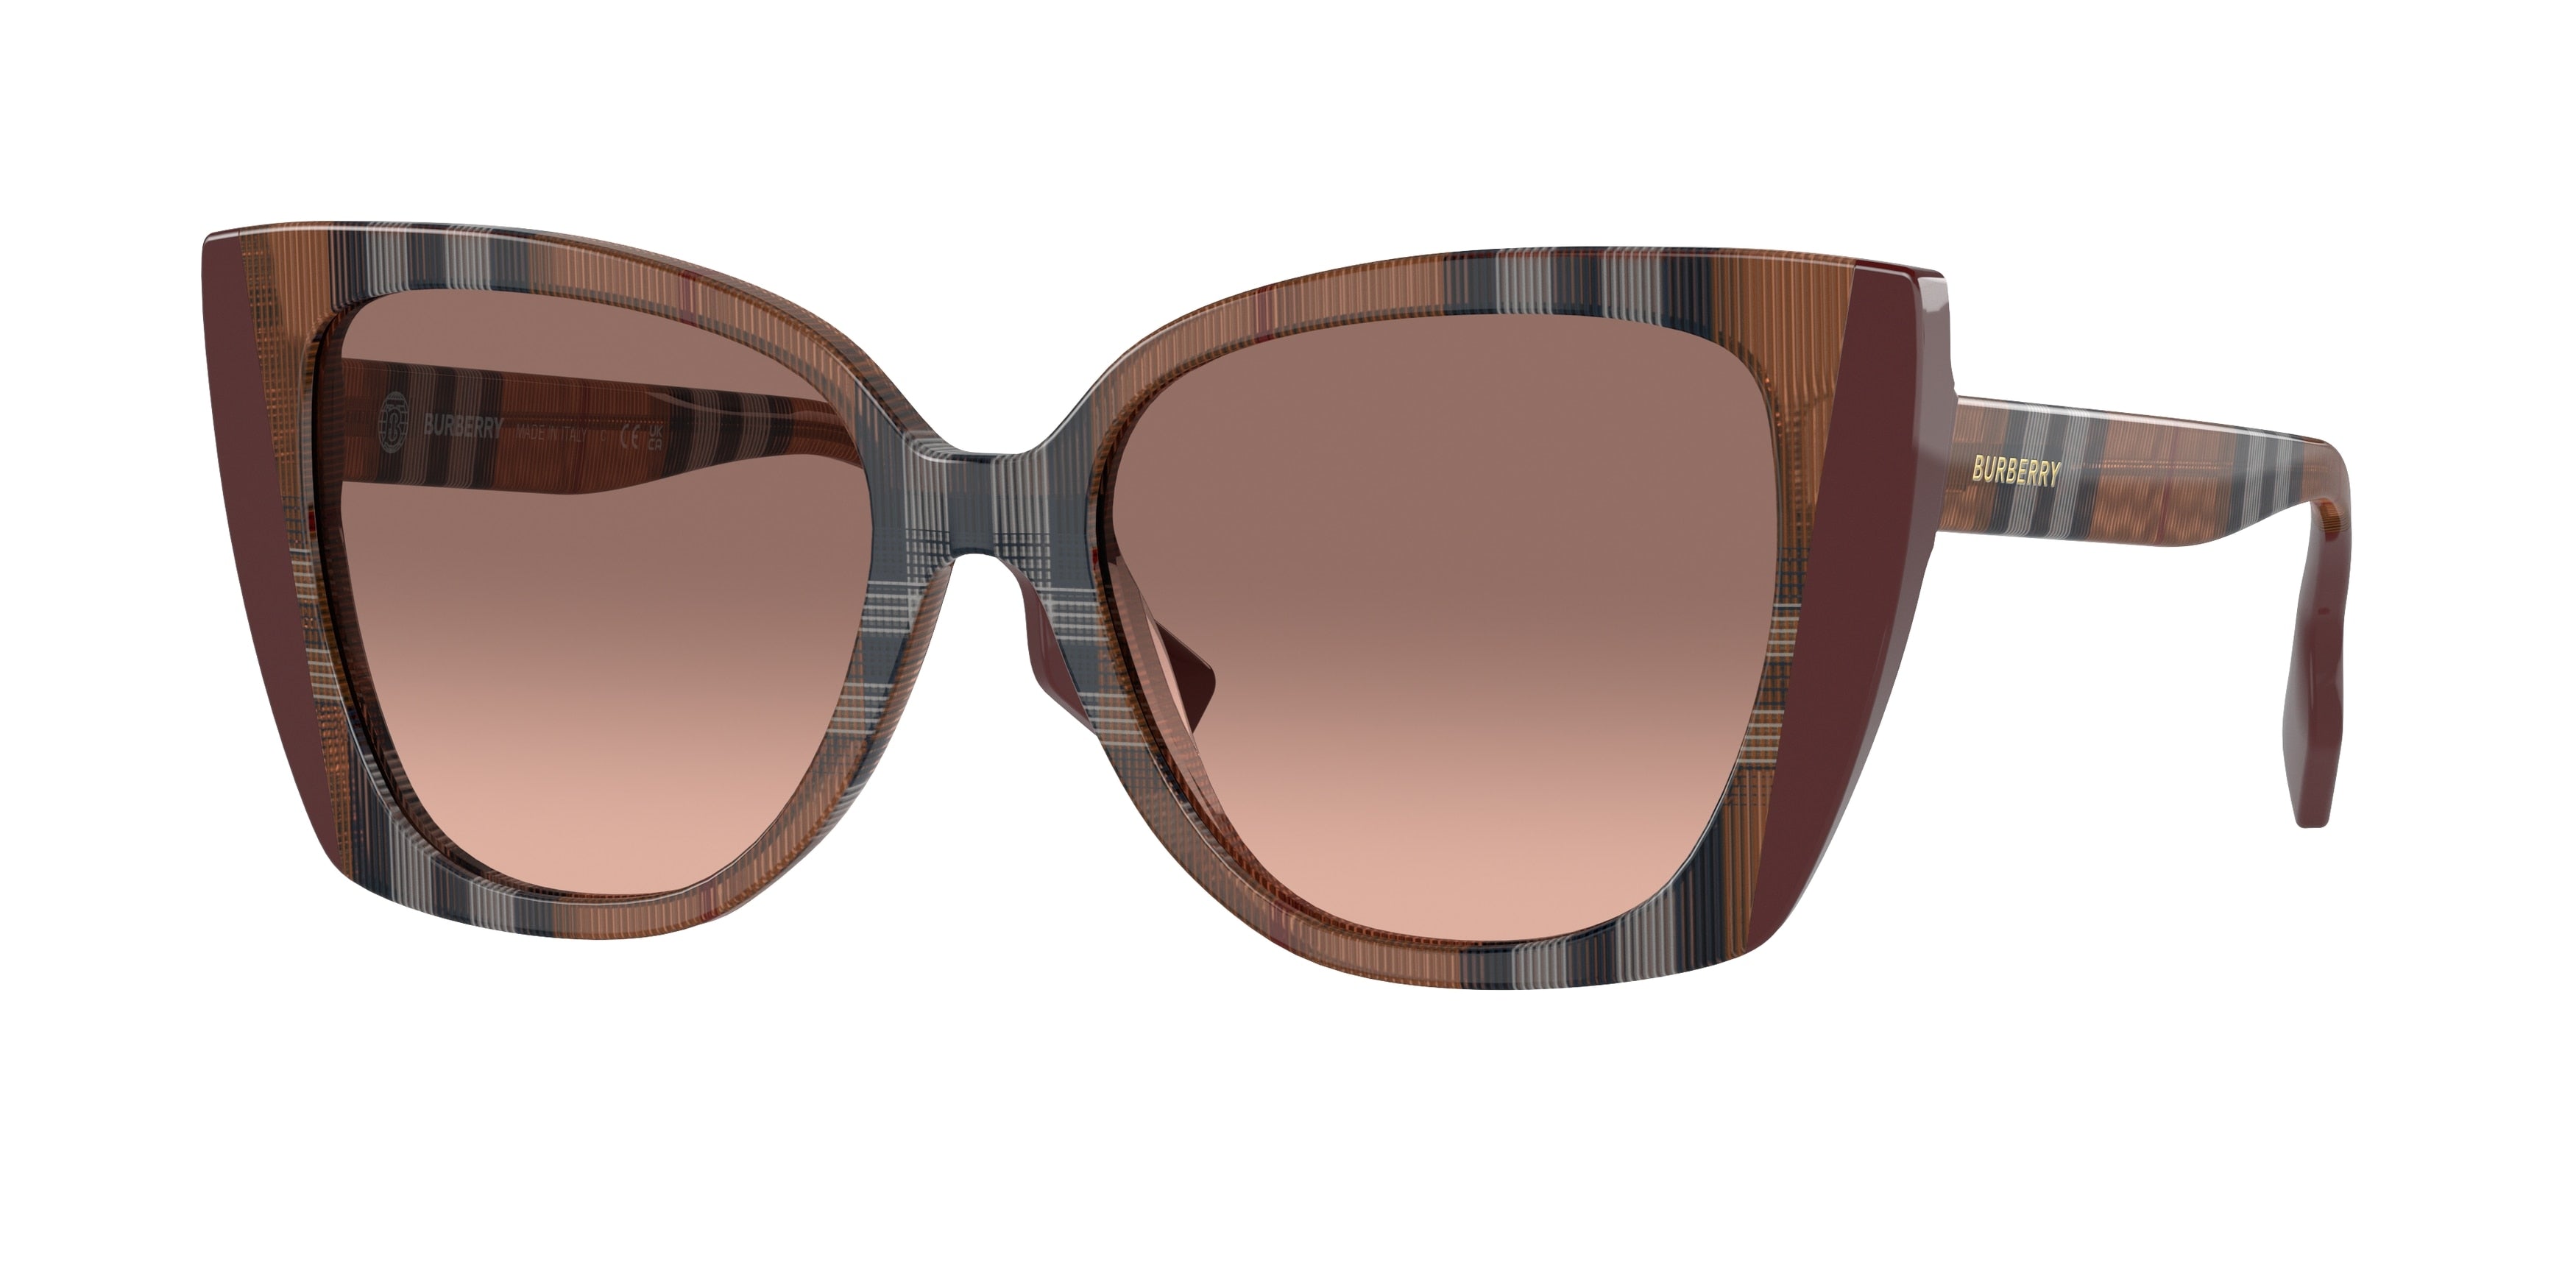 Burberry MERYL BE4393 Cat Eye Sunglasses  405413-Check Brown/Bordeaux 53-140-17 - Color Map Brown